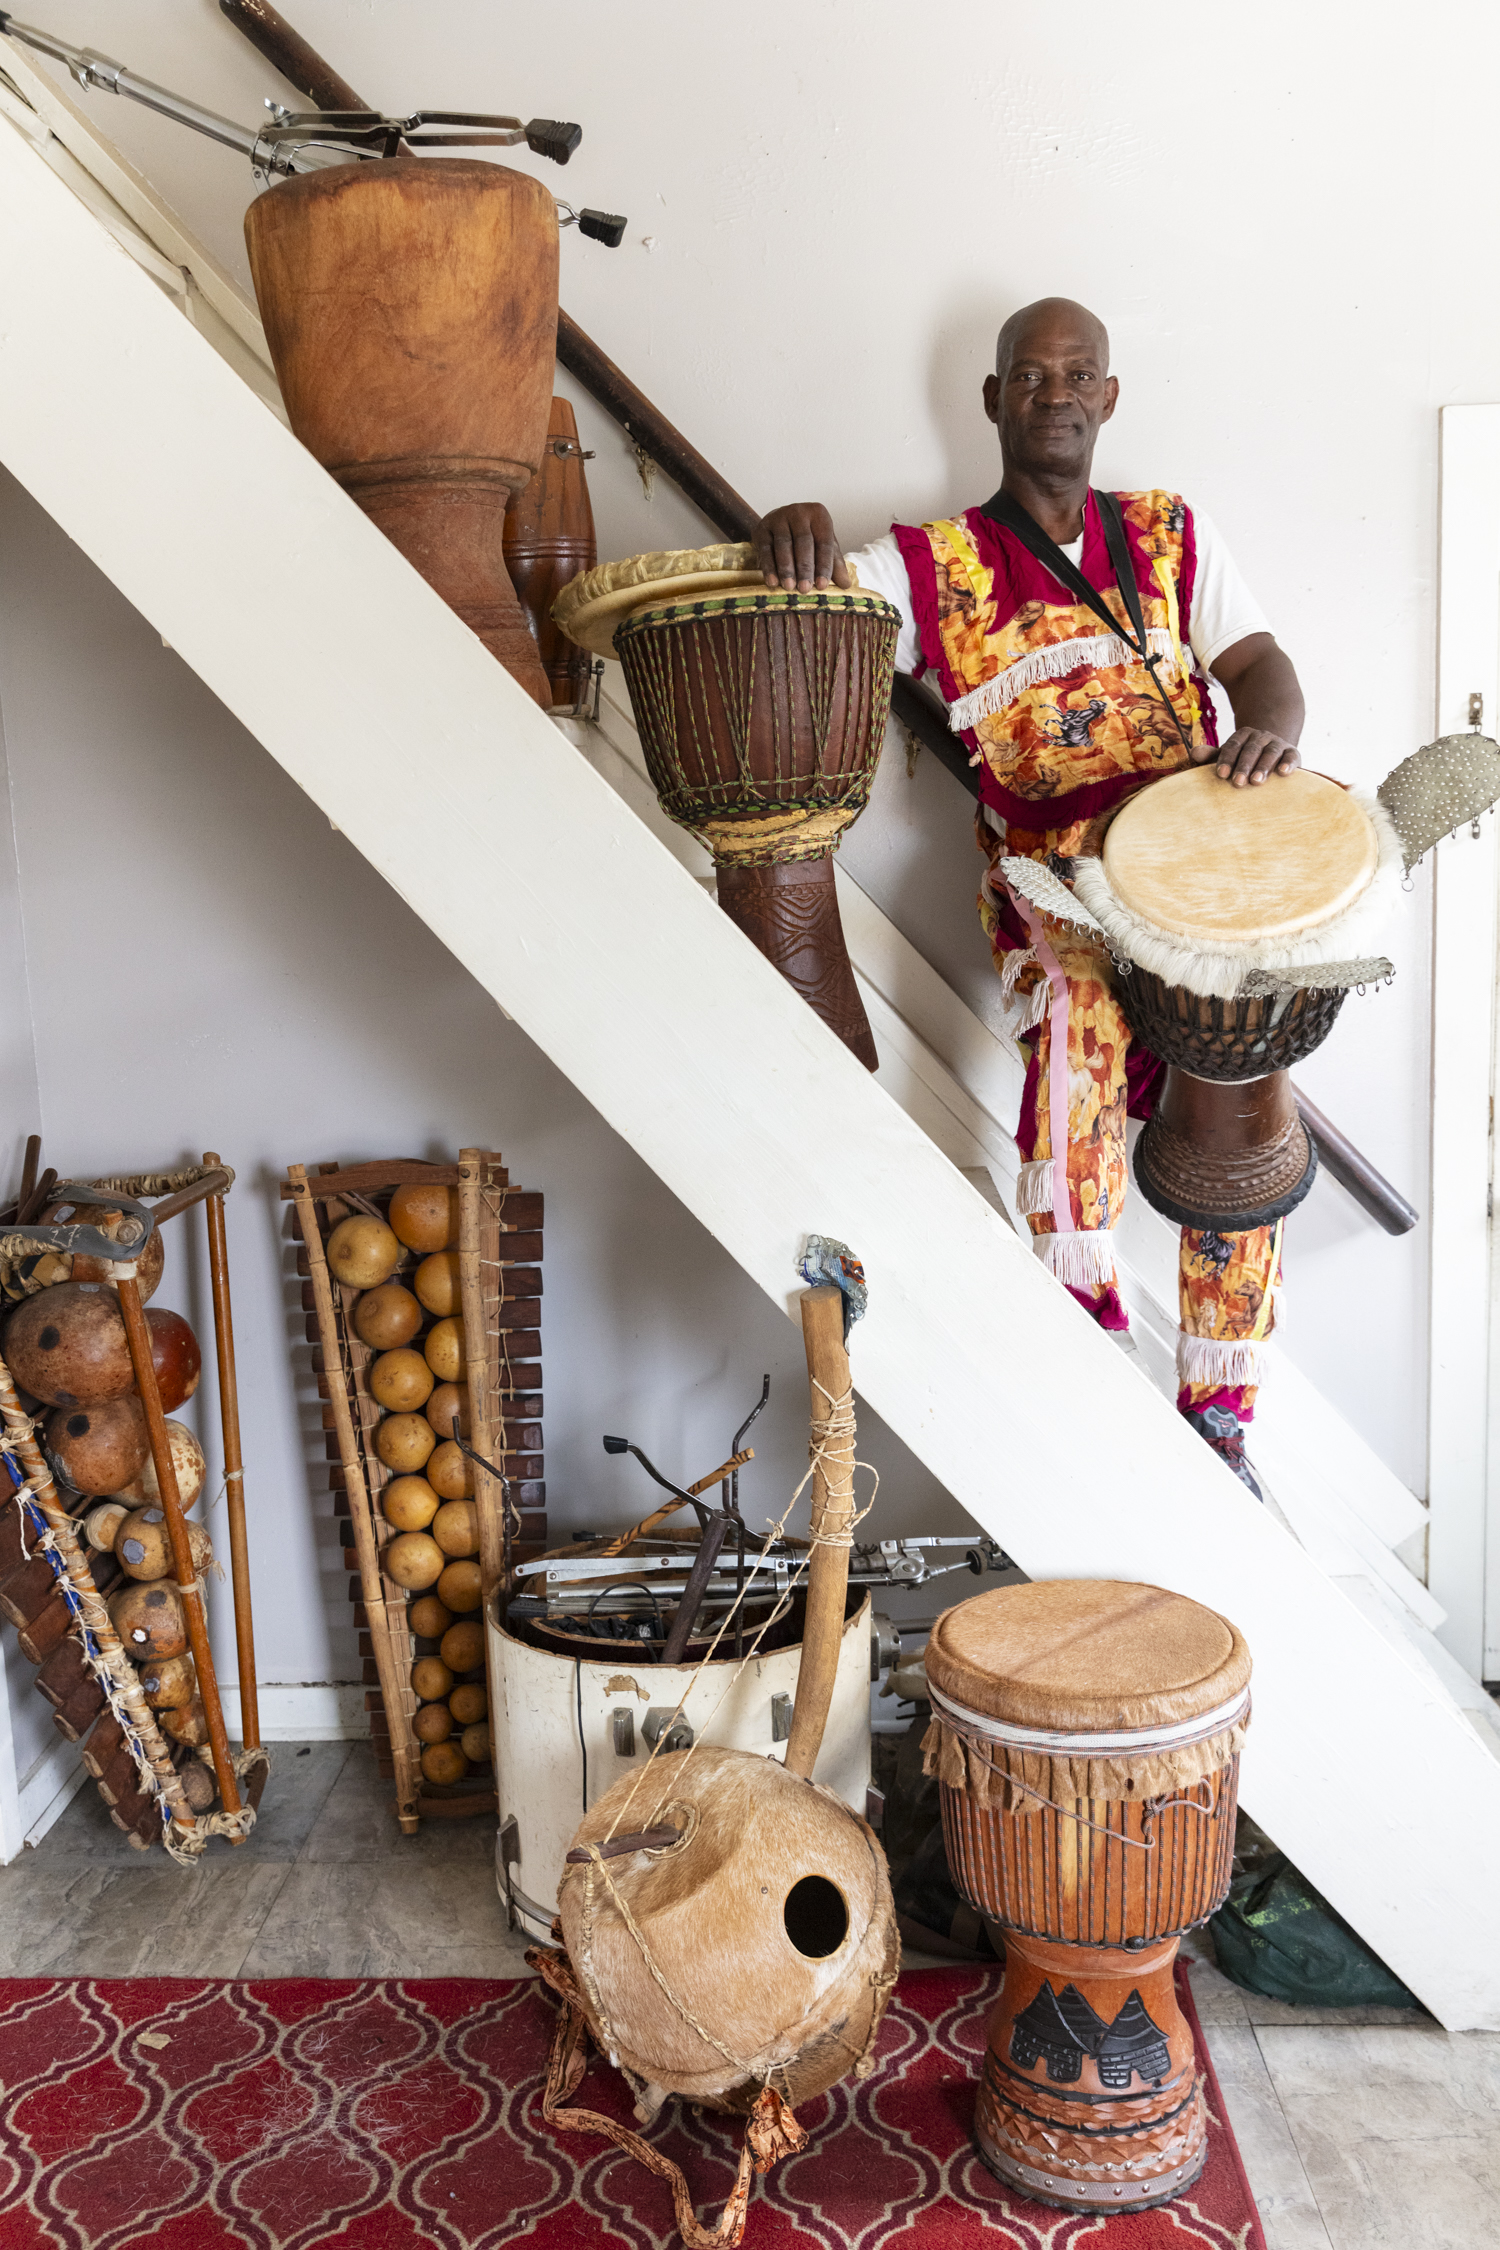 Koné stands with a collection of his handmade percussion instruments. He holds two rope-tuned djembe drums. Photo by Cedric Angeles.